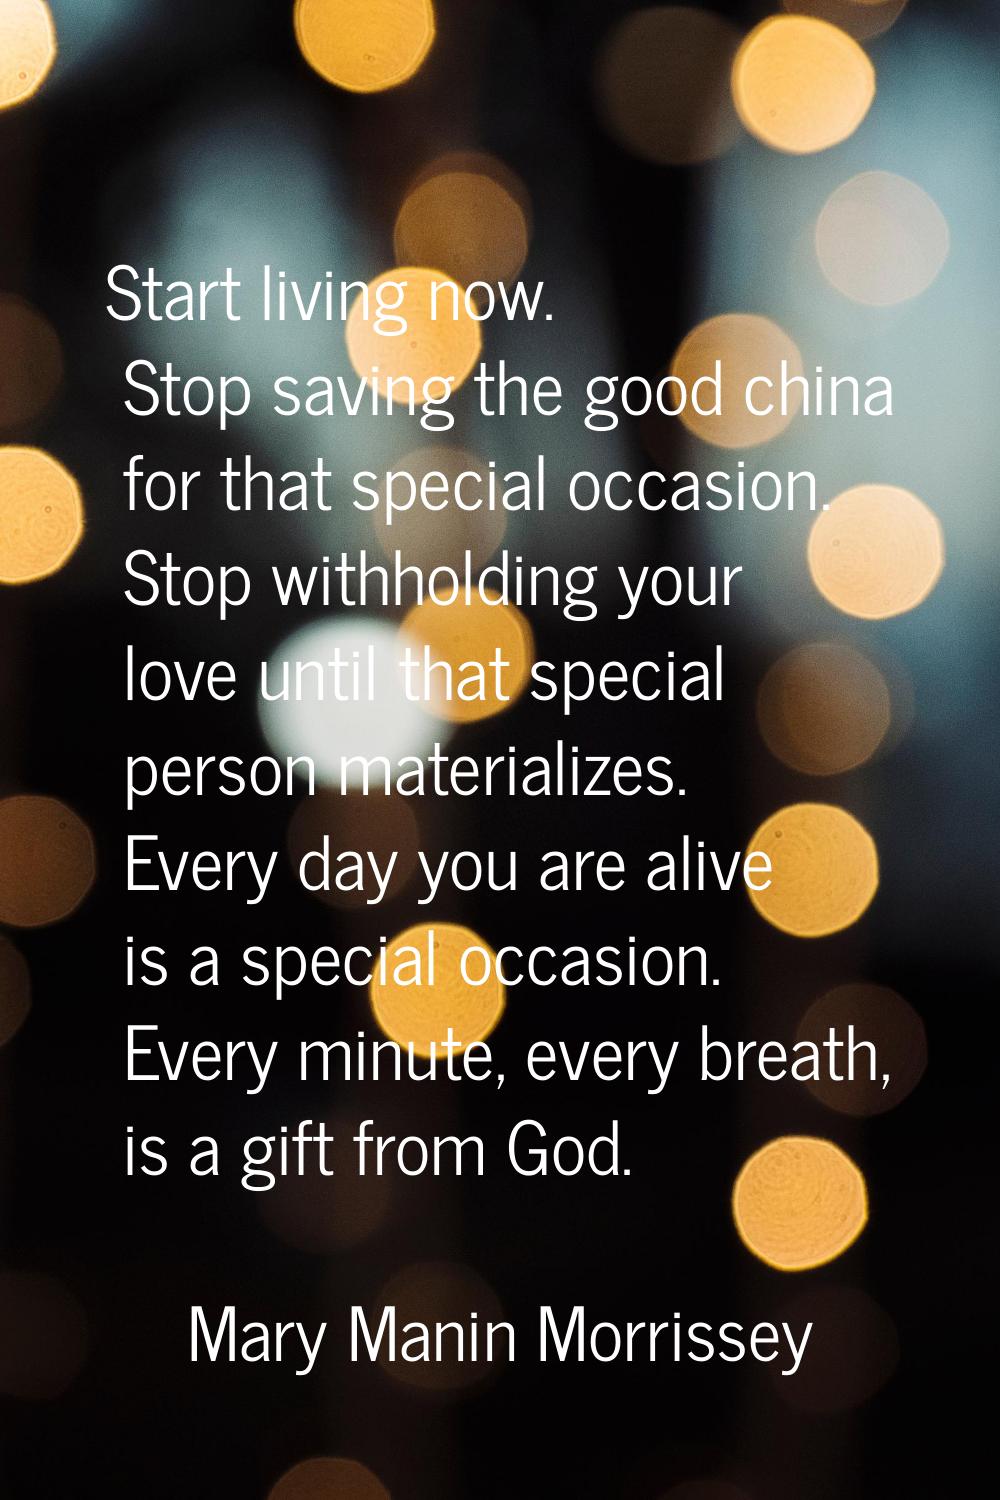 Start living now. Stop saving the good china for that special occasion. Stop withholding your love 